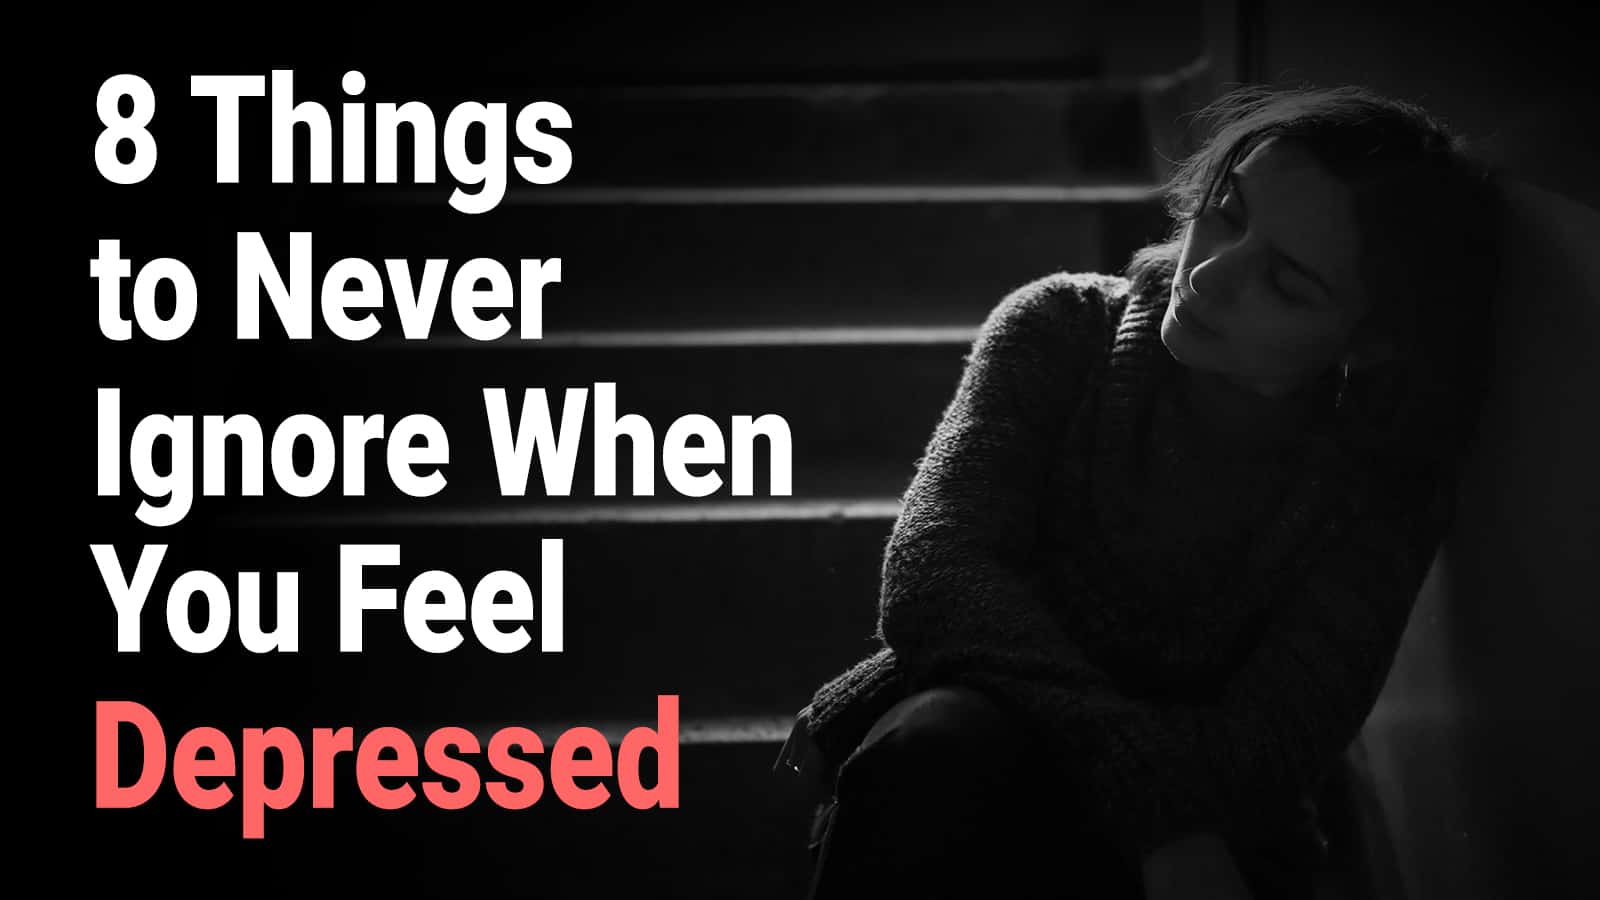 8 Things to Never Ignore When You Feel Depressed